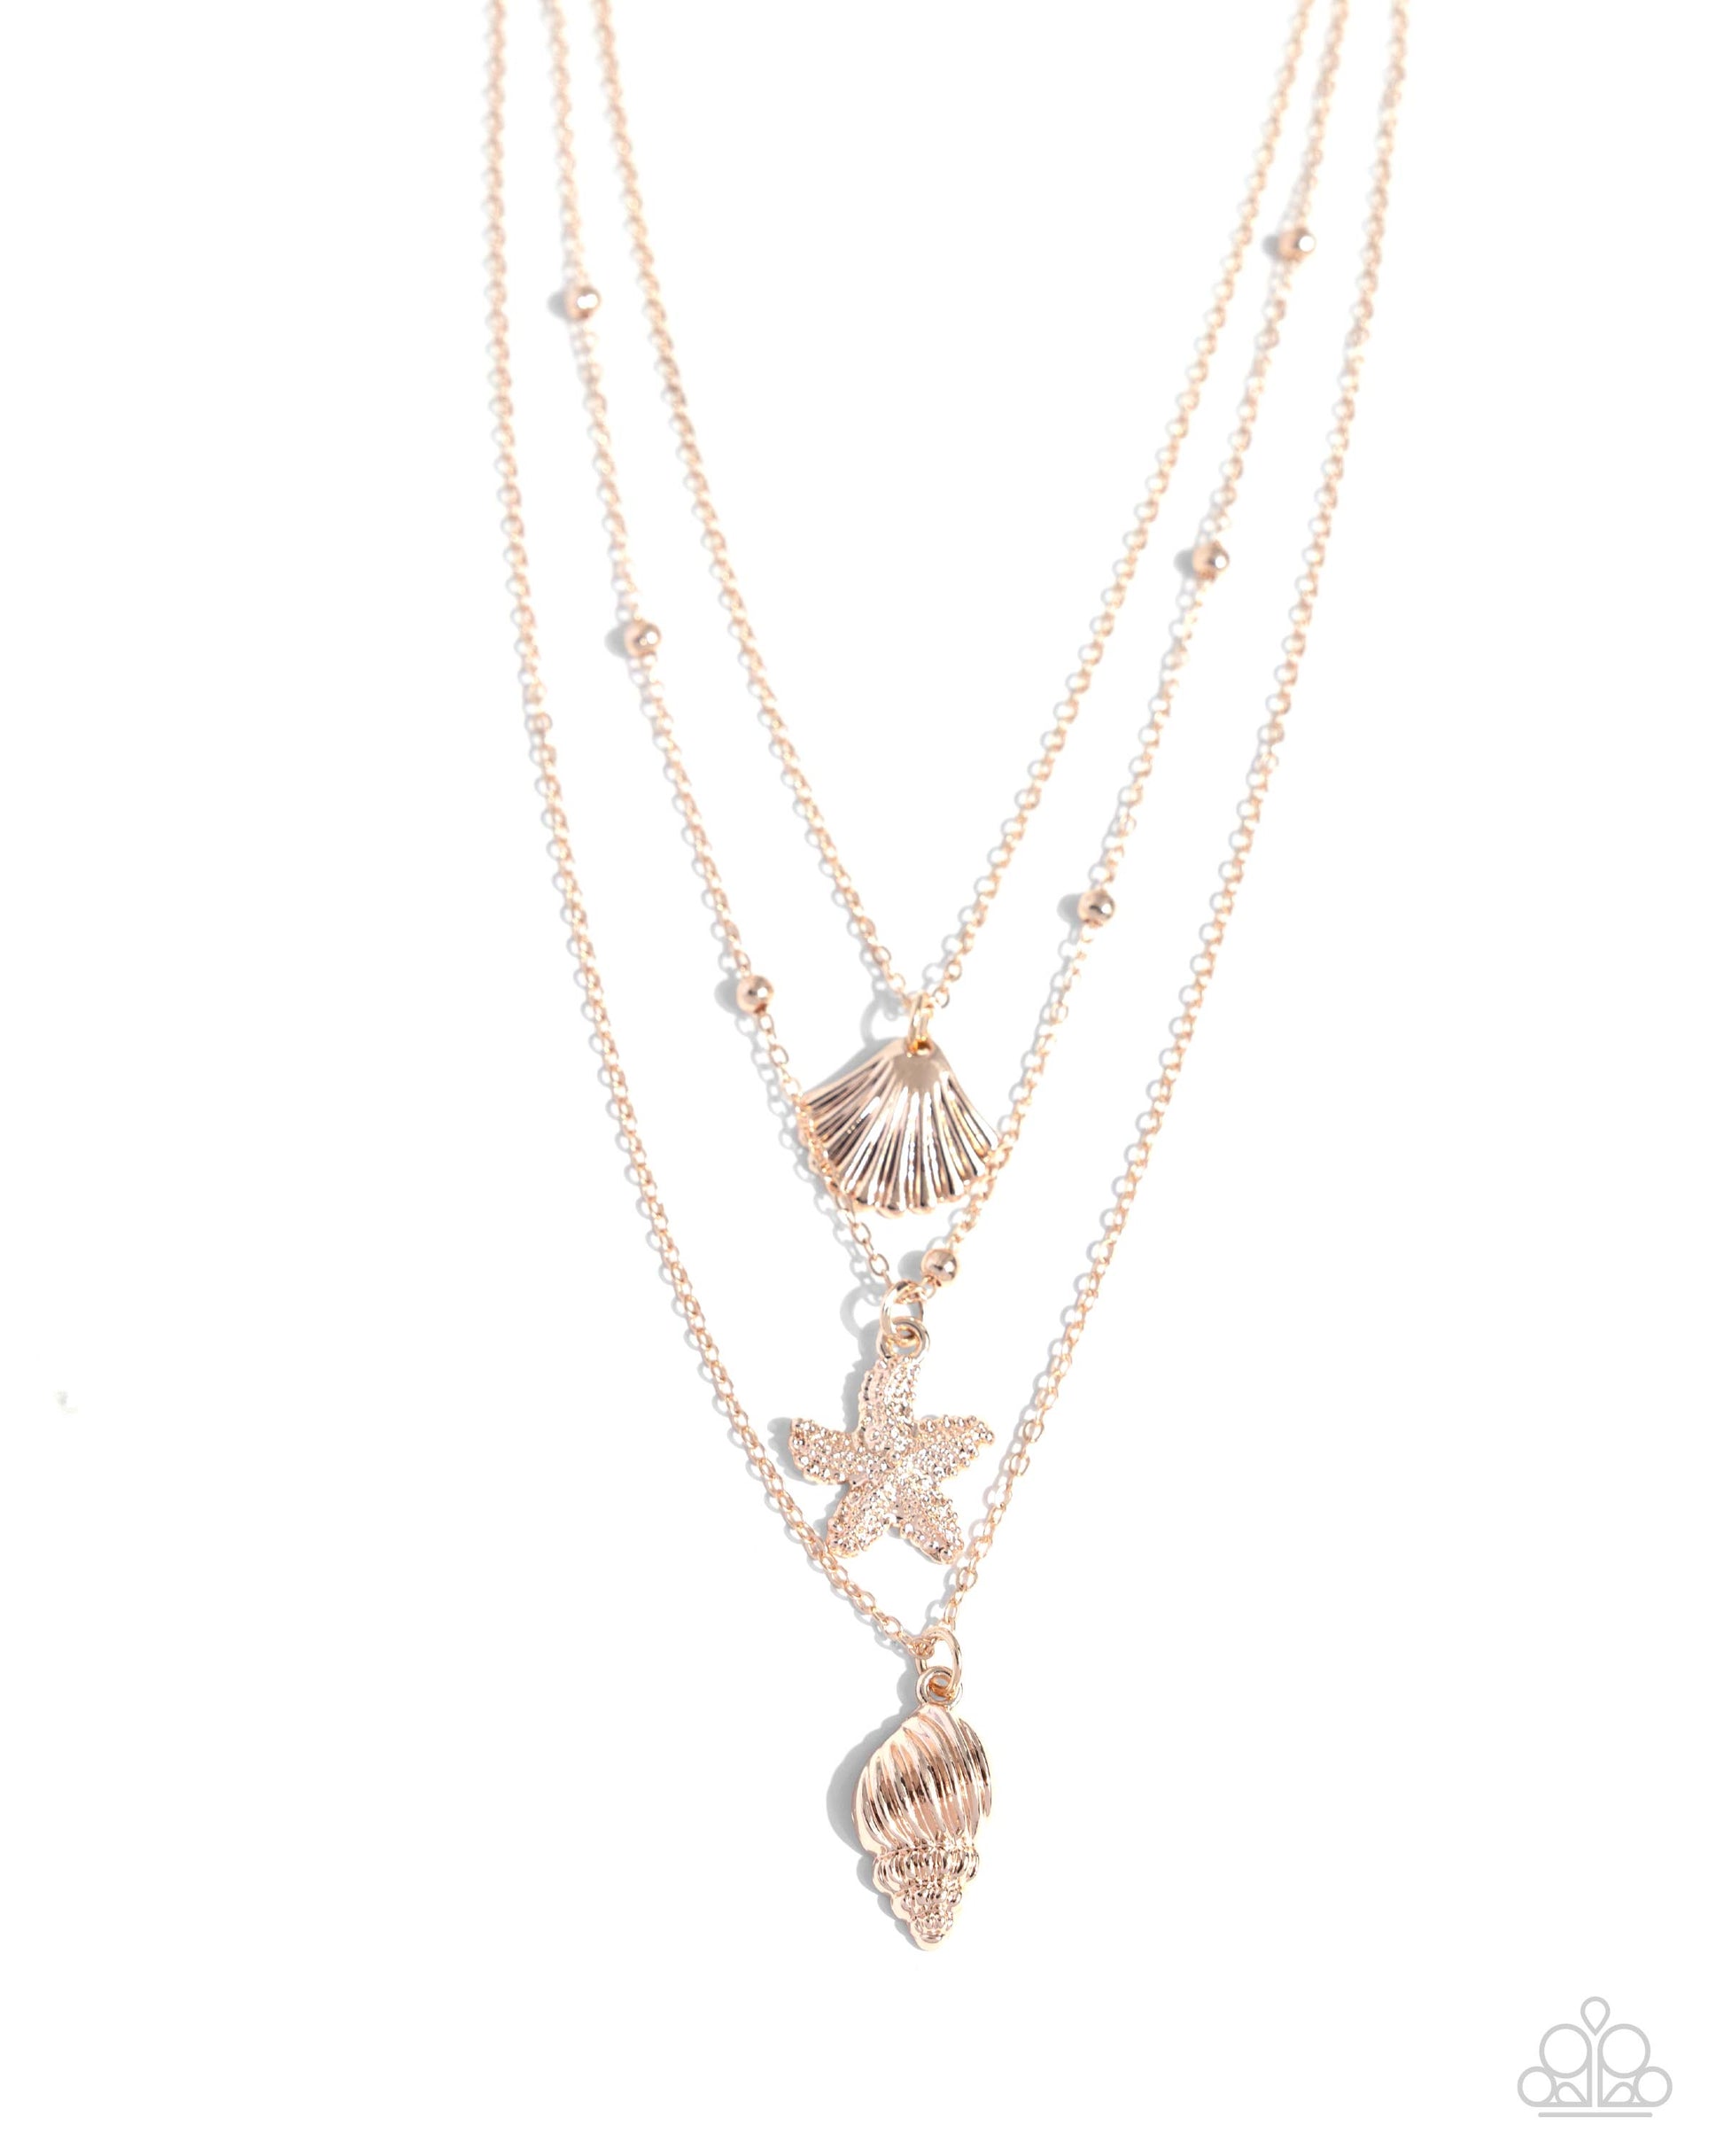 Seashell Sonata Rose Gold Necklace - Paparazzi Accessories A mismatched collection of dainty rose gold and satellite rose gold chains loop and layer below the neckline. Dangling along each layer, textured rose gold seashells and a starfish create a coastal centerpiece. Features an adjustable clasp closure. Sold as one individual necklace. Includes one pair of matching earrings. SKU: P2SE-GDRS-133WO Earring: "SHELL, I Was In the Area - Rose Gold" (Sold Separately)